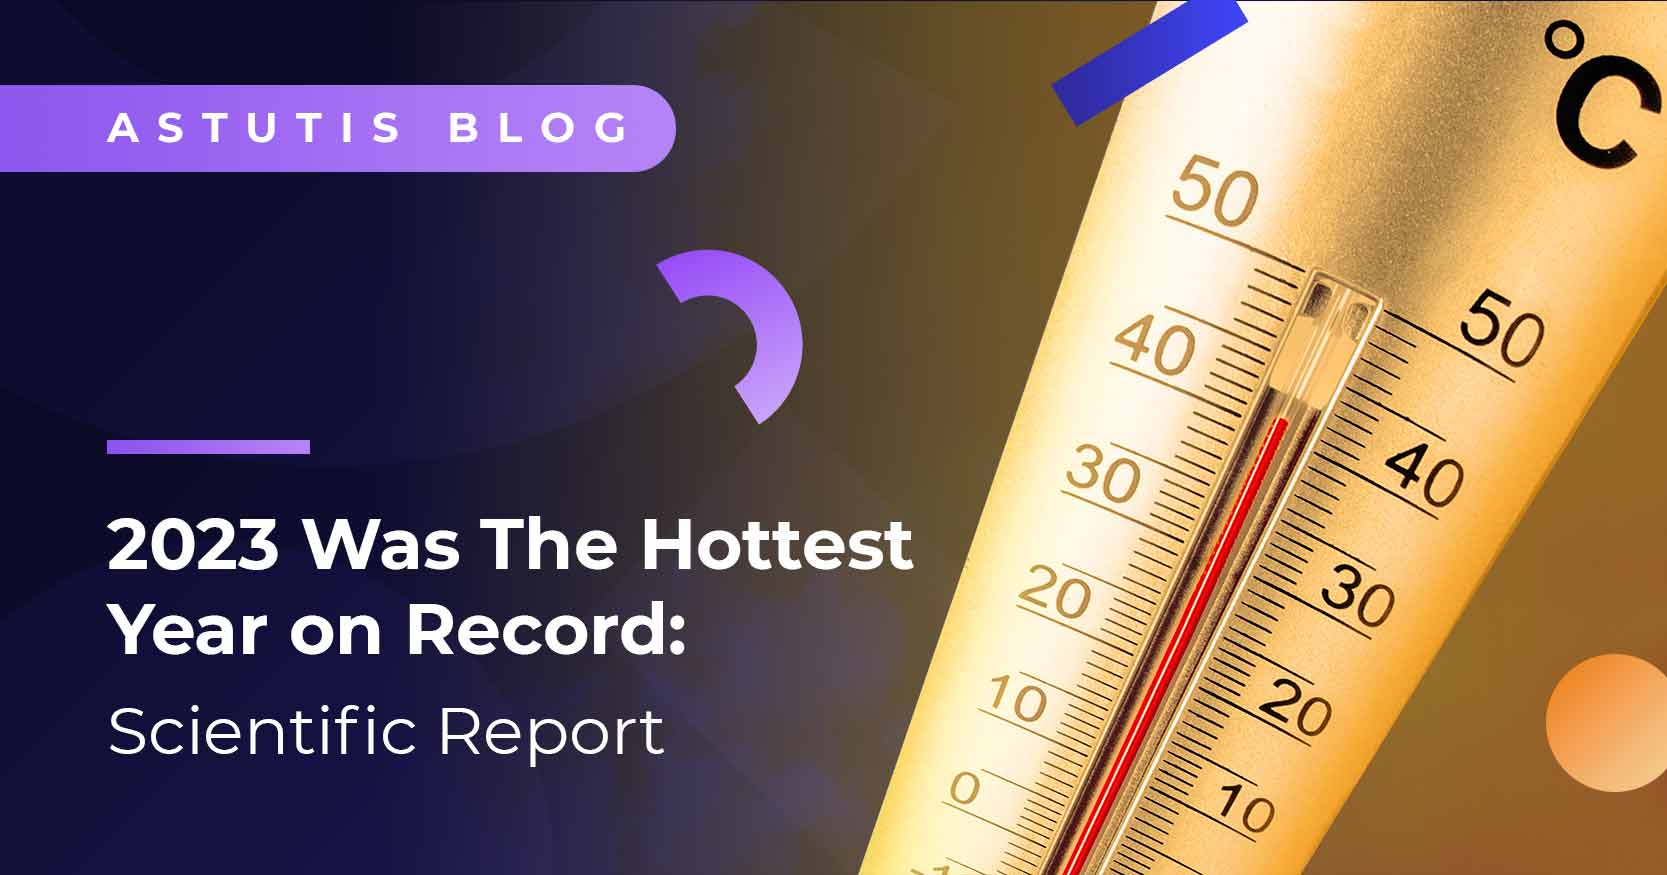 2023 Was the Hottest Year on Record: Scientific Report Image